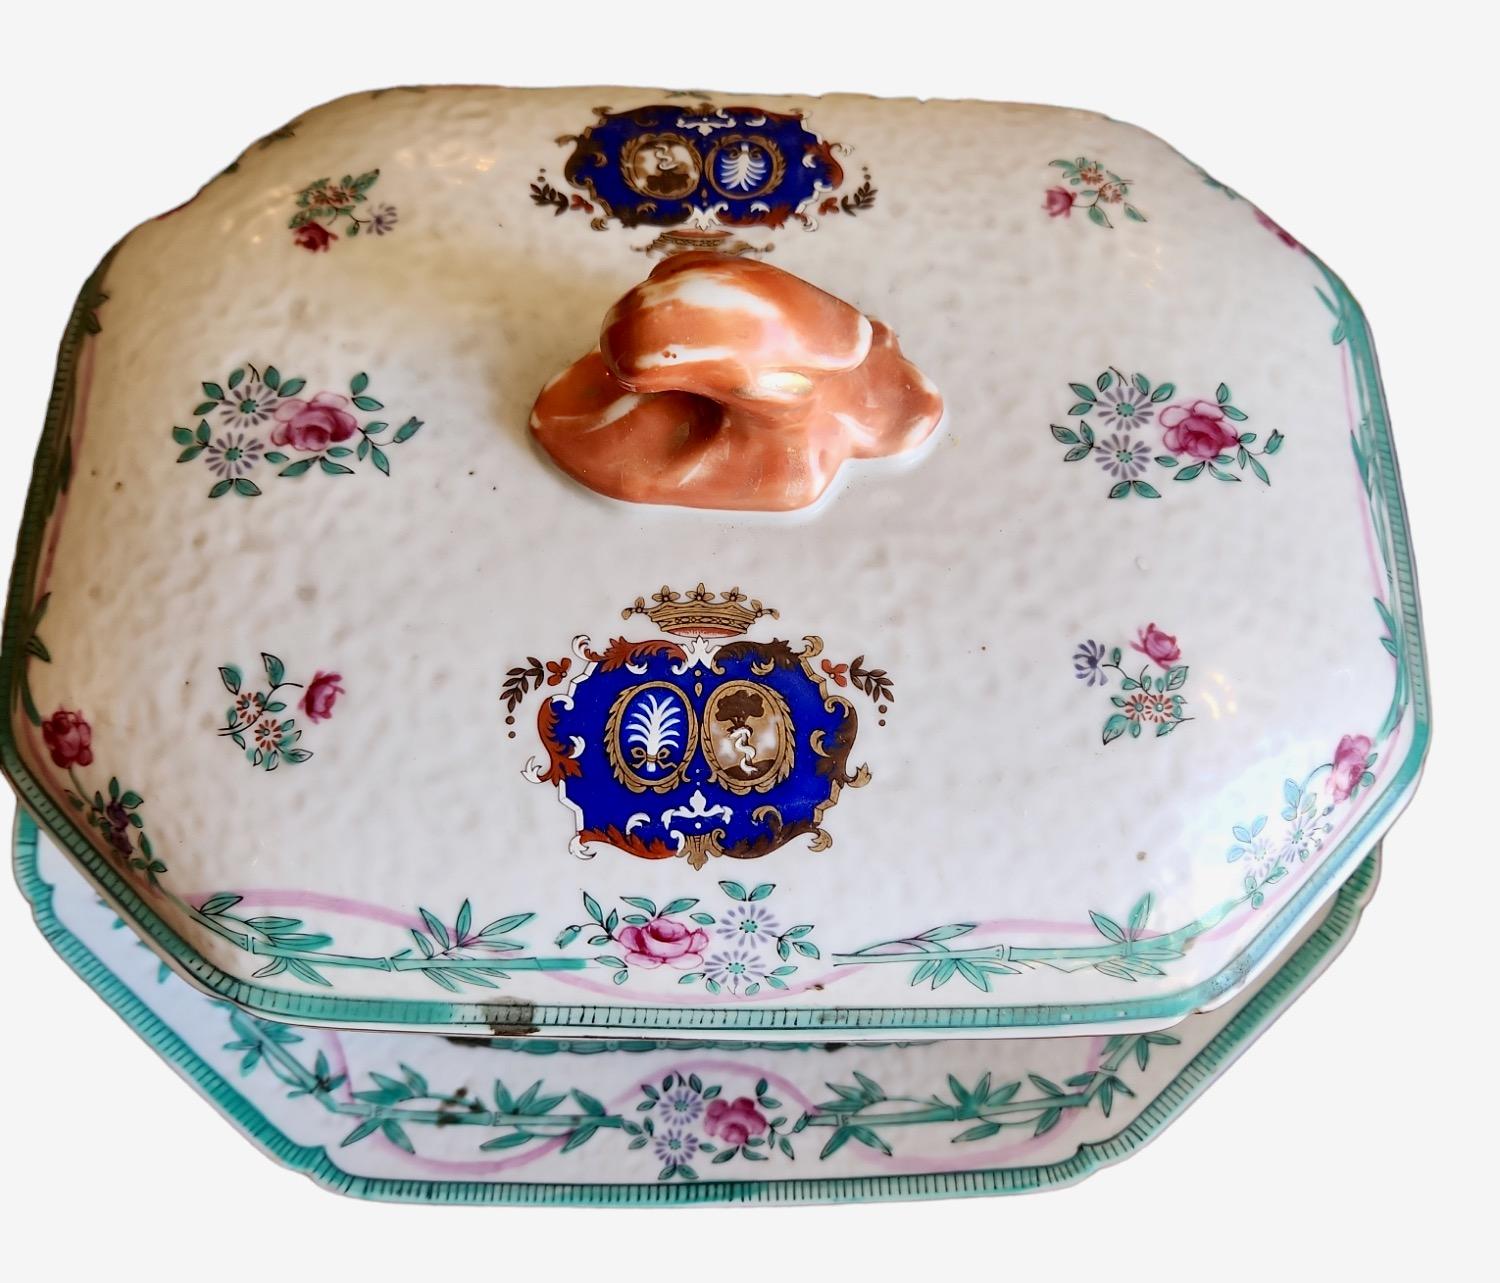 19th century Chinese Export tureen and platter with orange peel finish. Hand painted. Armorial motif. Coat of arms/family crest. Platter is 15